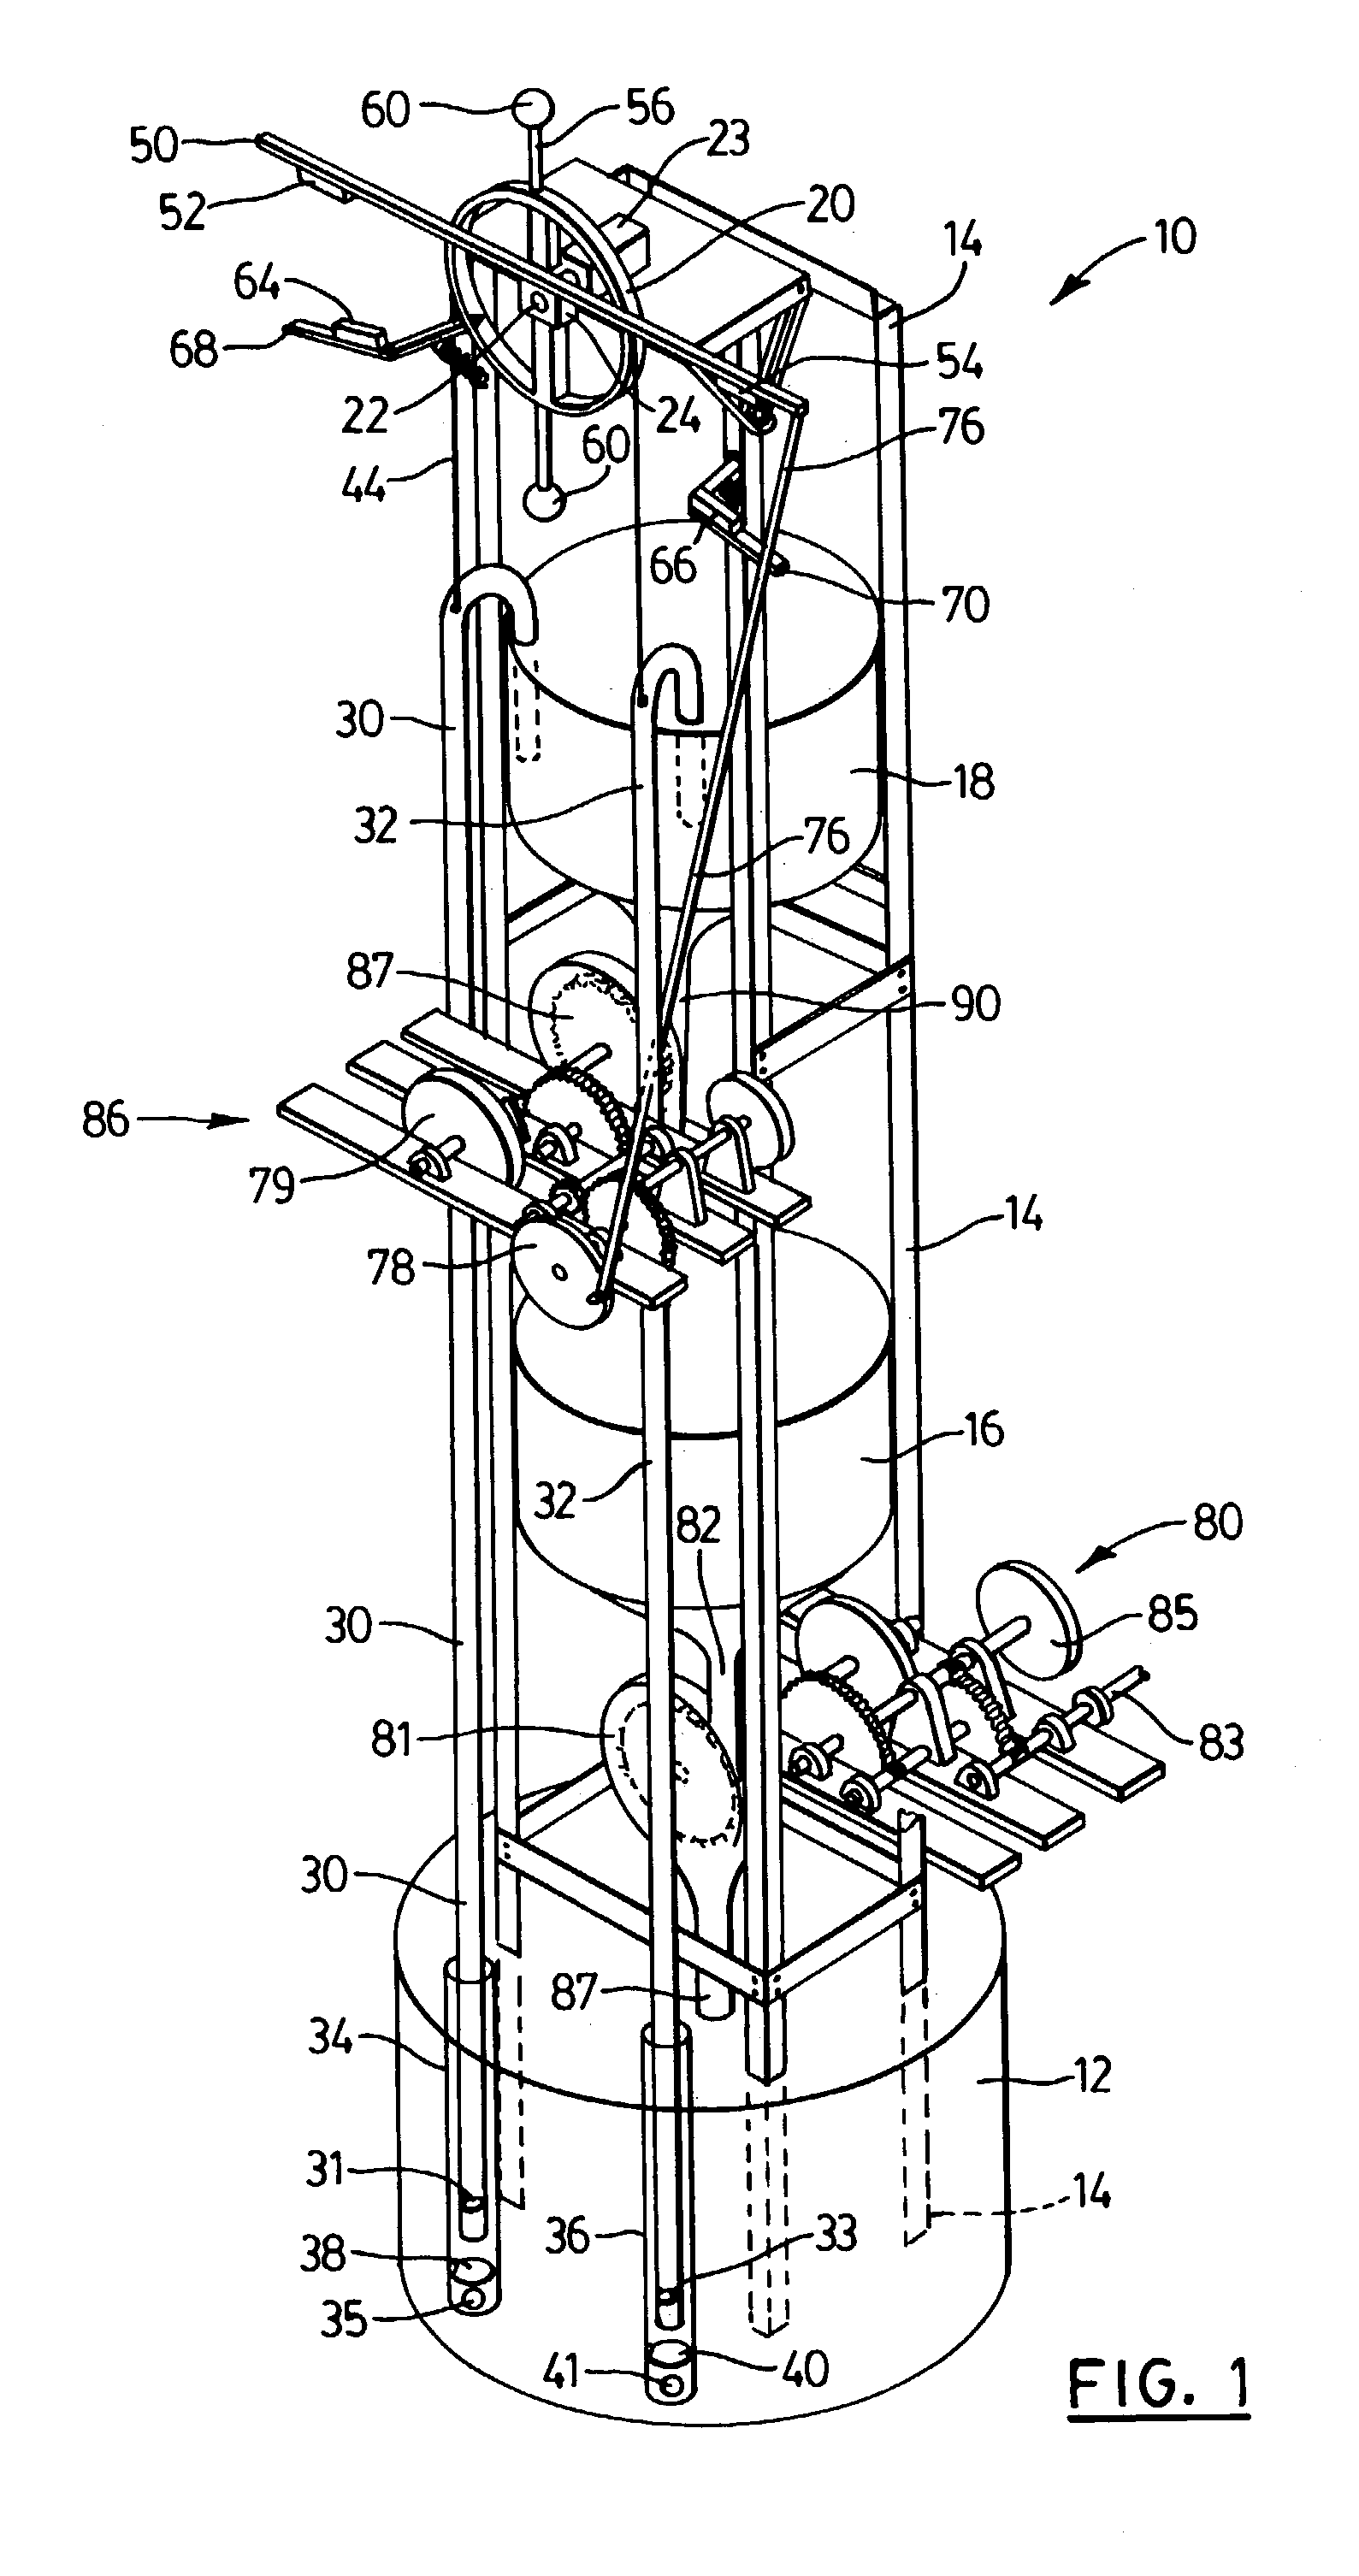 Apparatus for converting gravitational energy to electrical energy